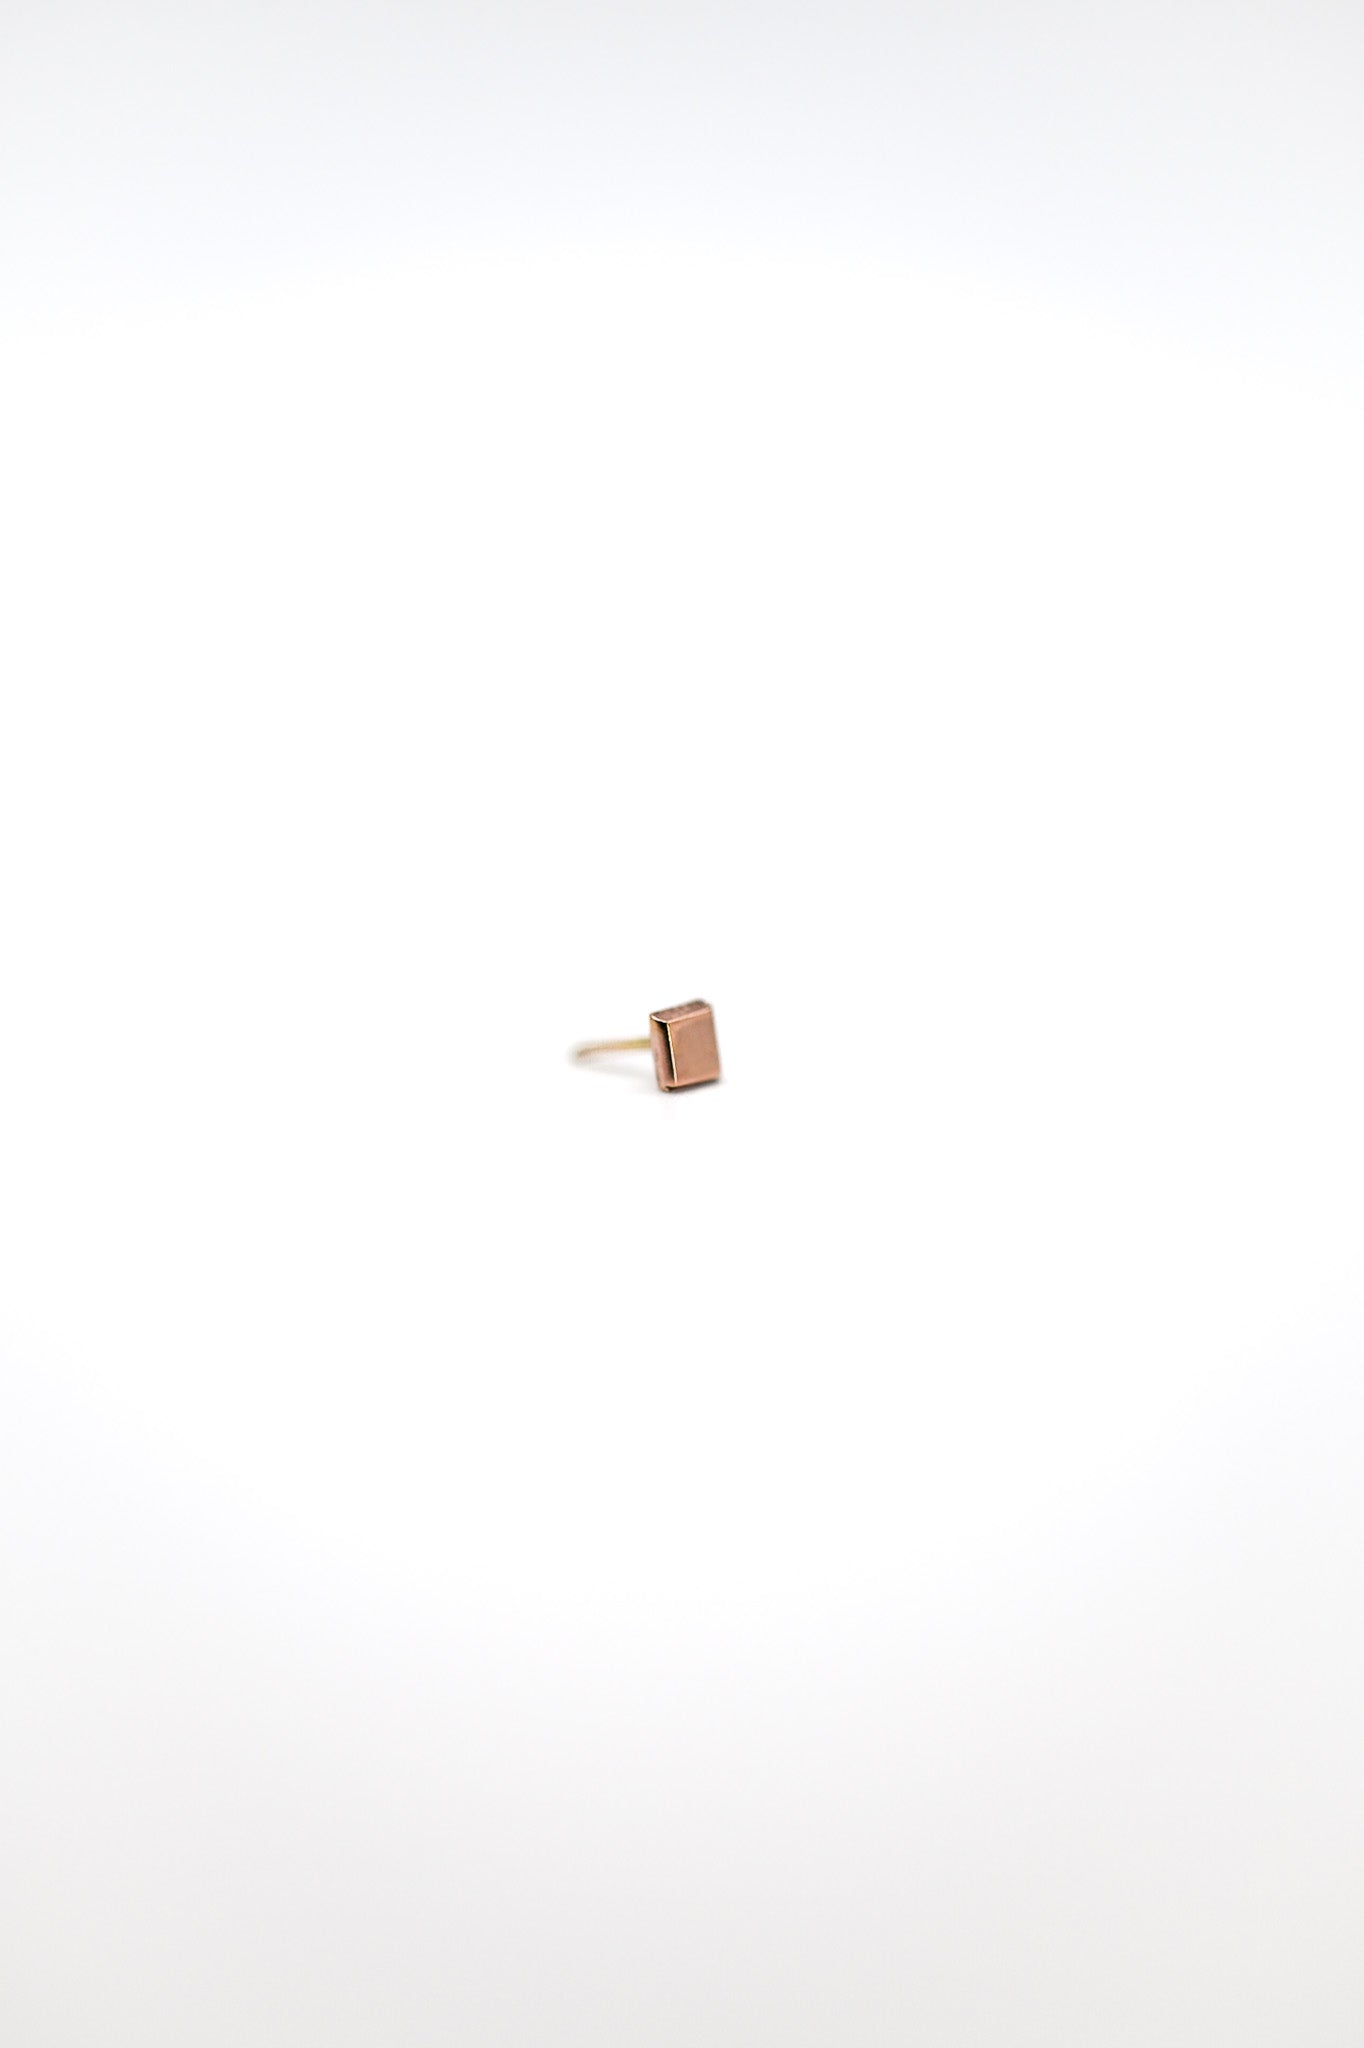 Square Mirror Flat Back Stud Earring, Solid Gold or Rose Gold